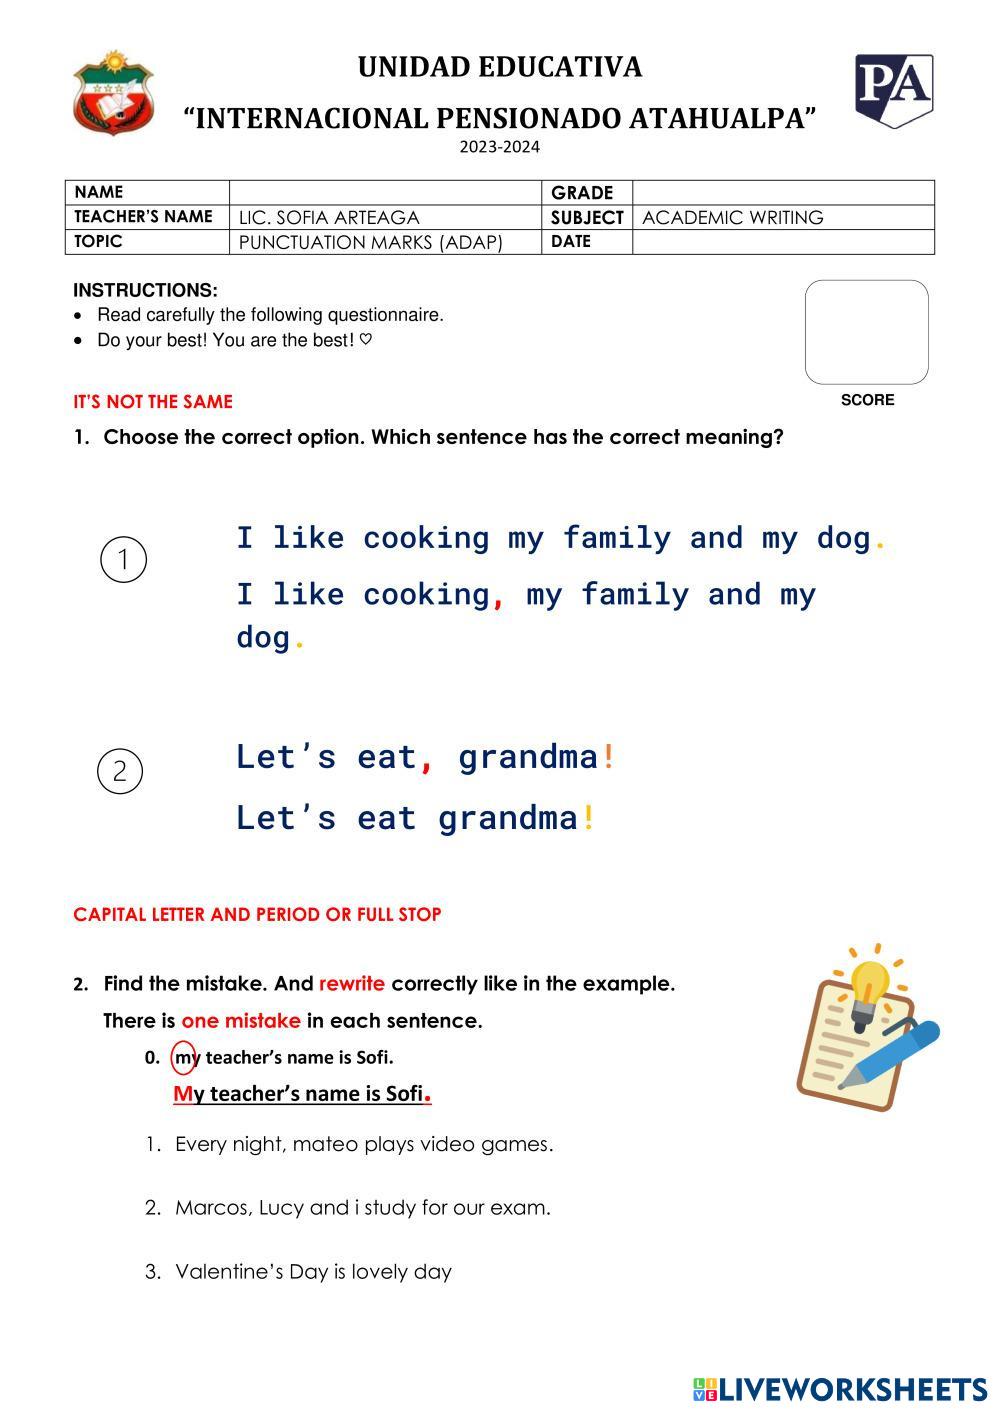 speech marks and punctuation worksheets